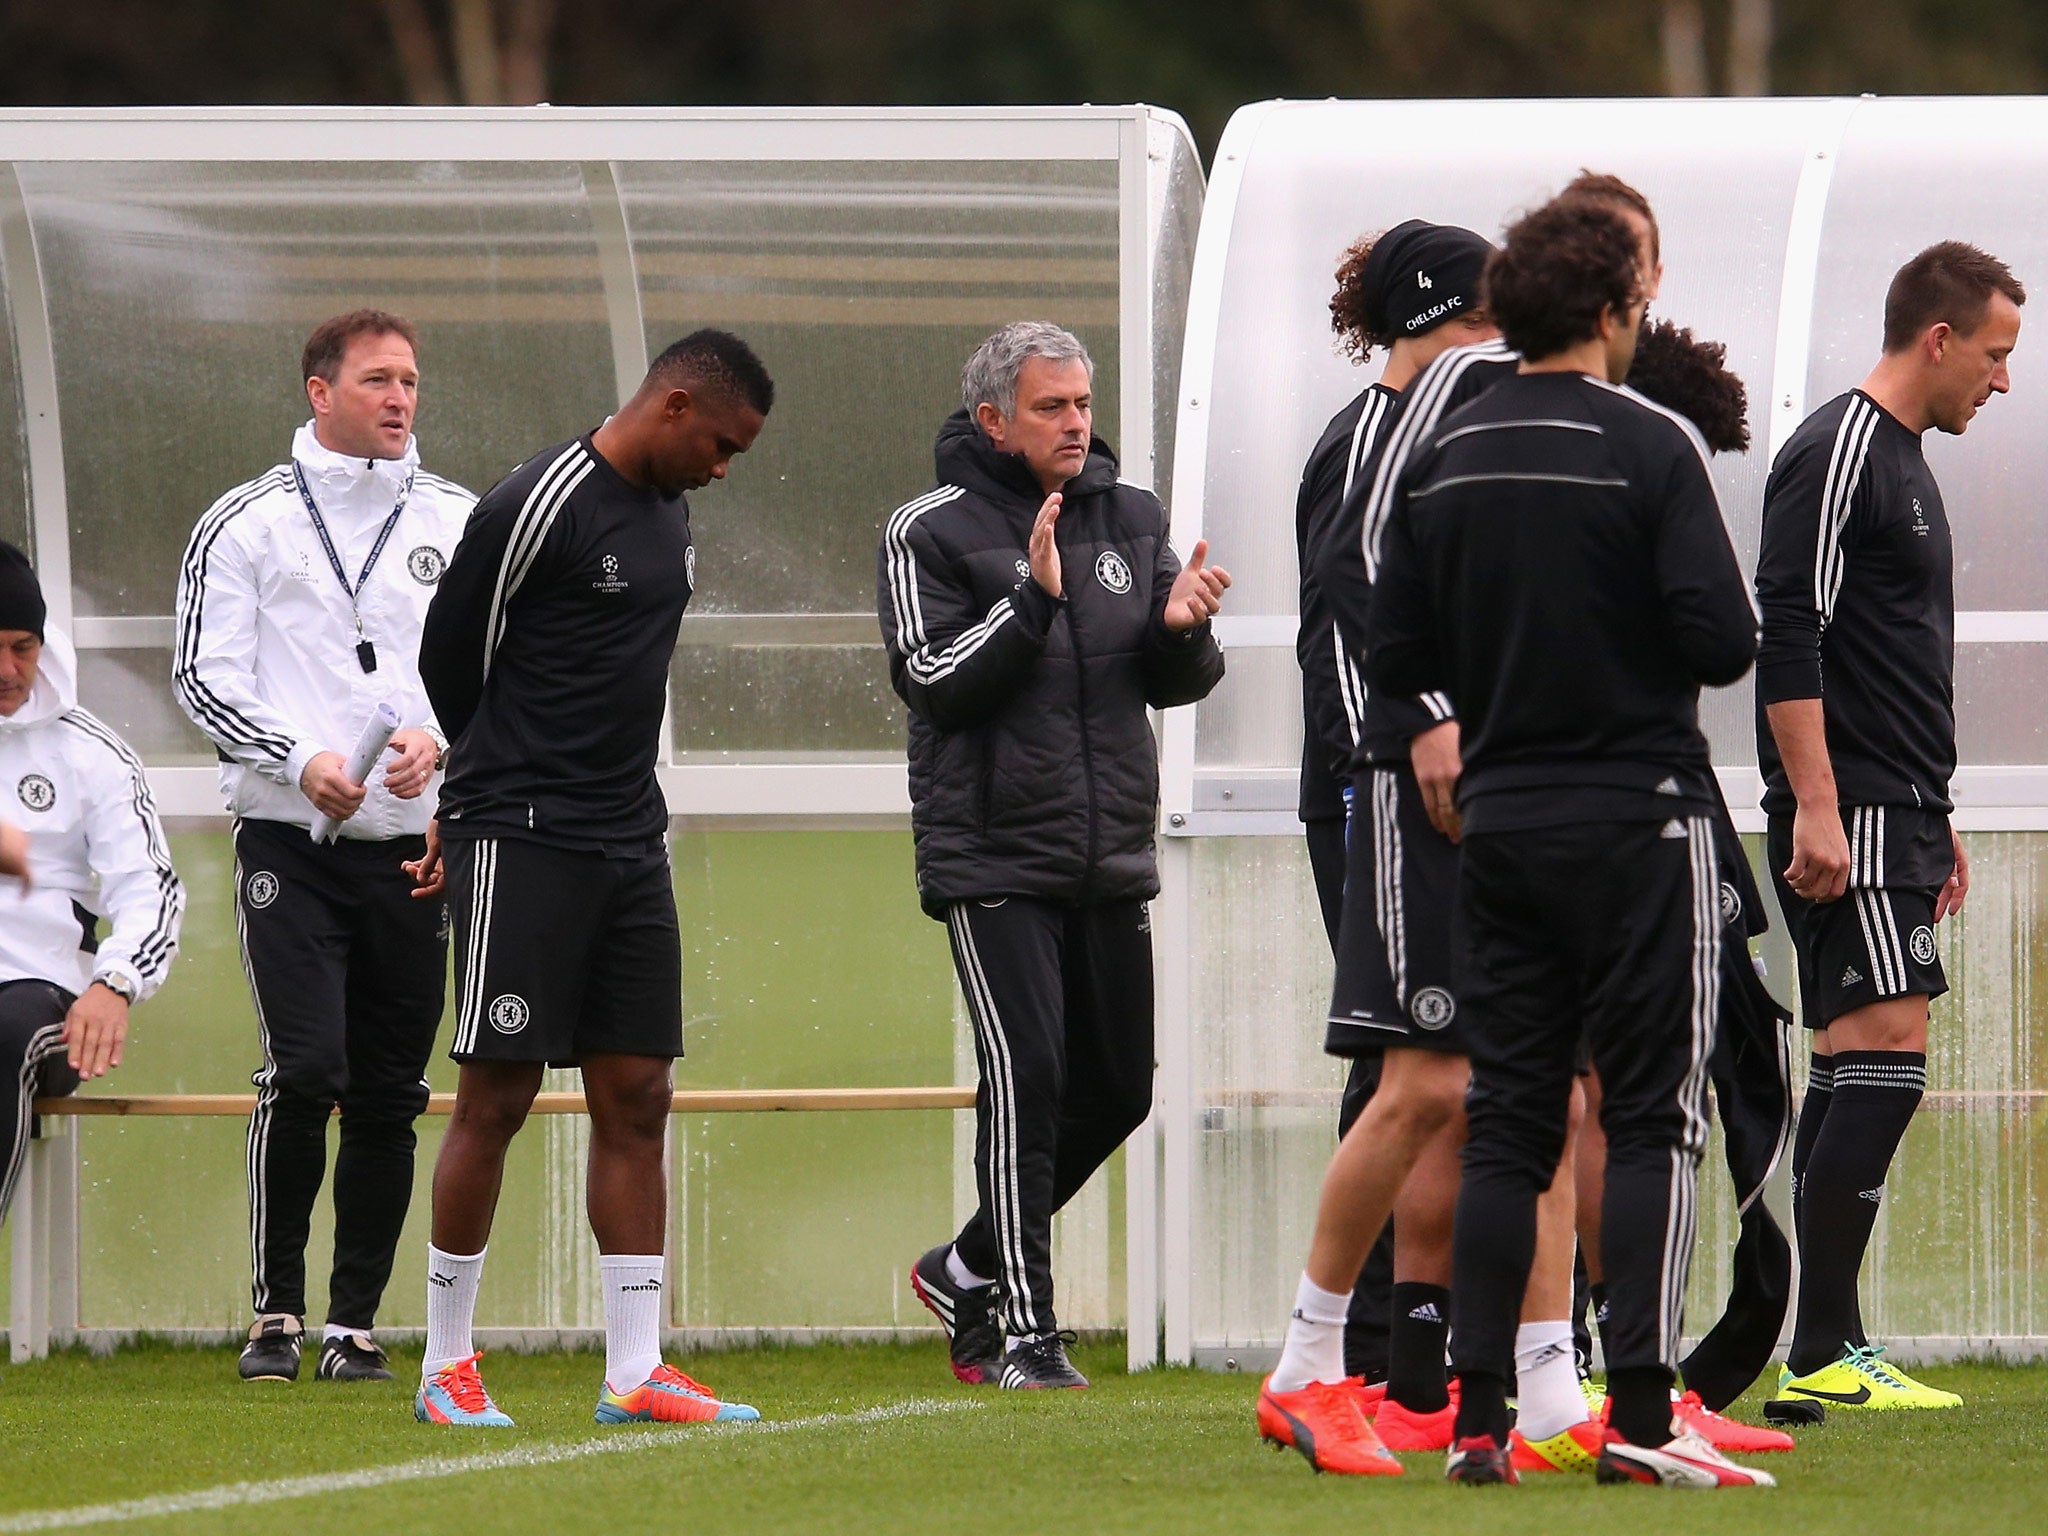 Jose Mourinho takes training with the Chelsea team ahead of their Champions League game against PSG